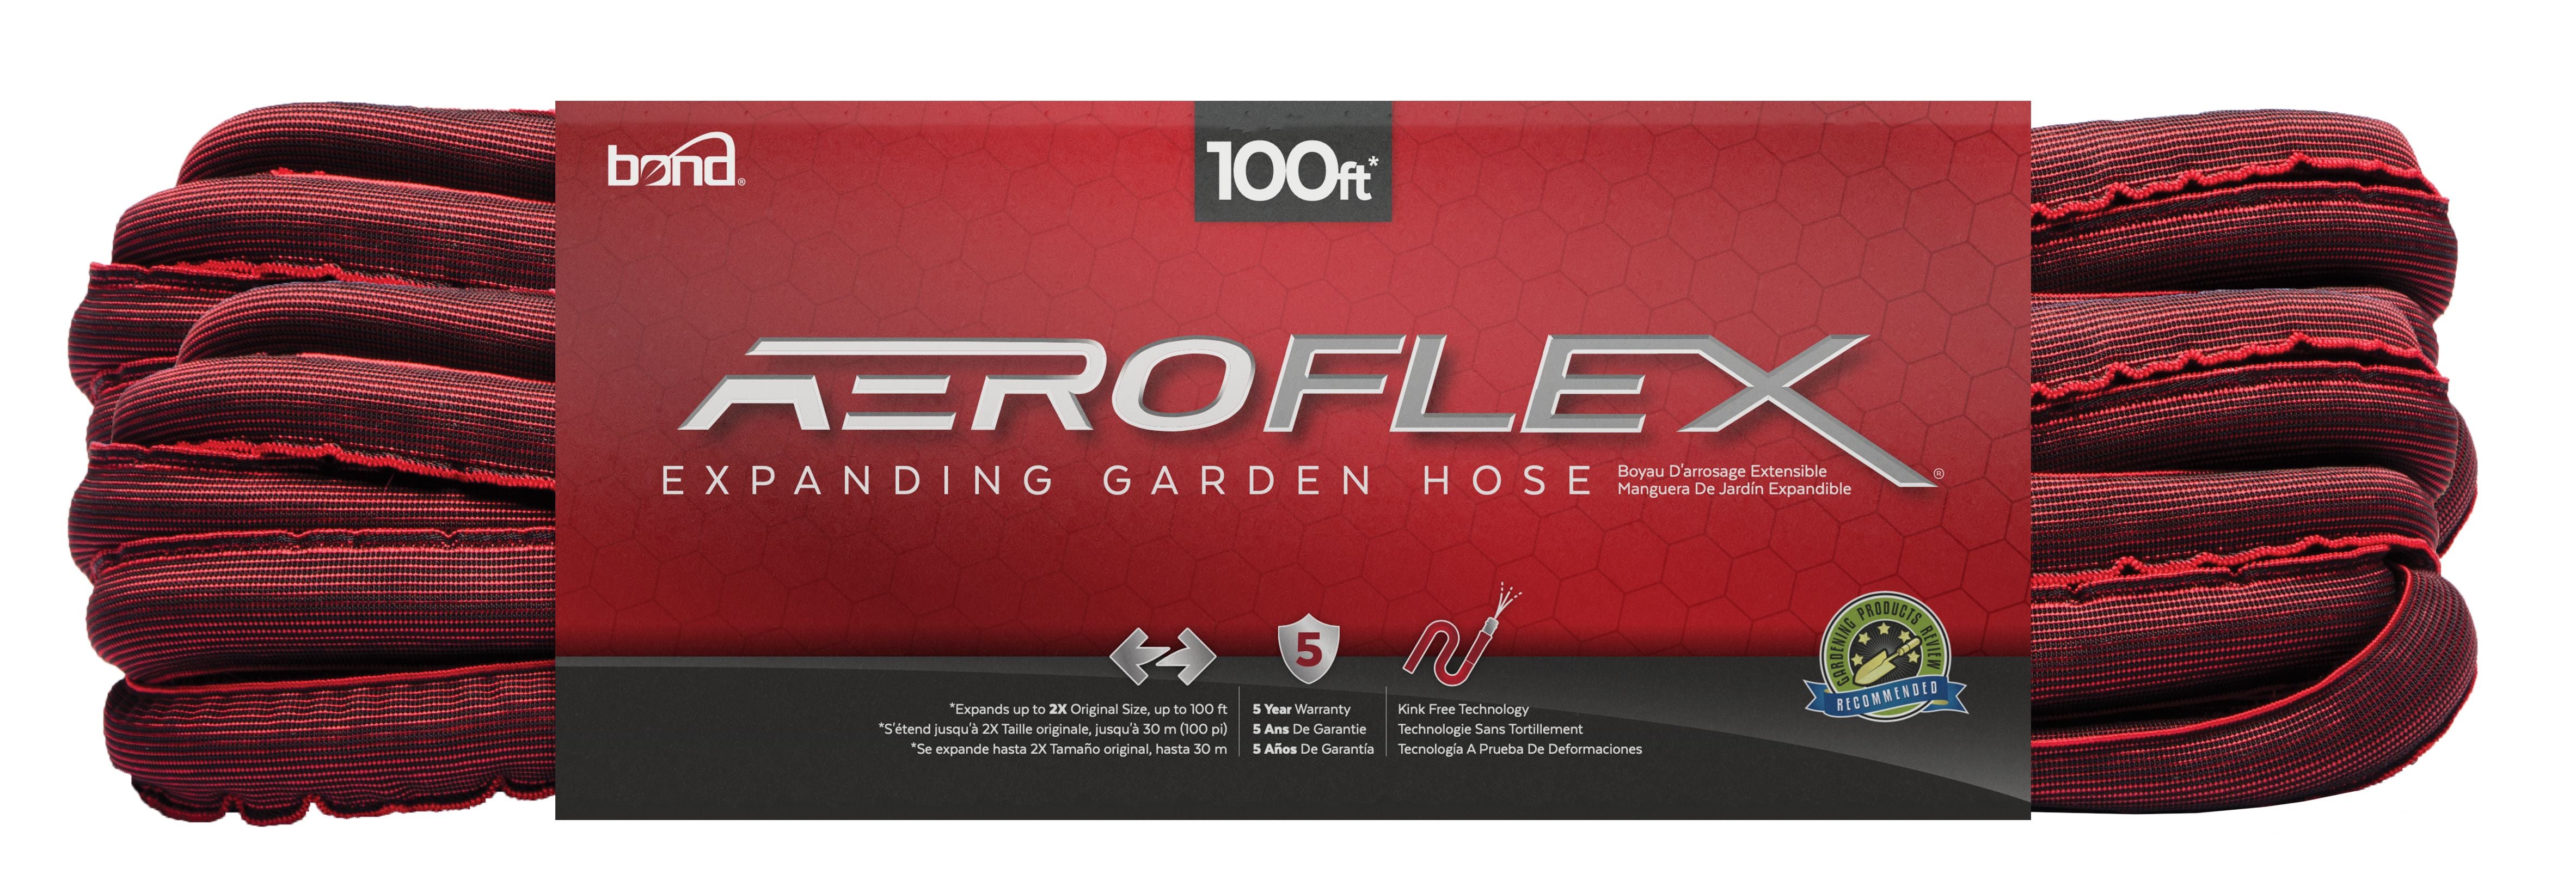 Aeroflex Expanding Garden Hose Review: The Ultimate Watering Solution